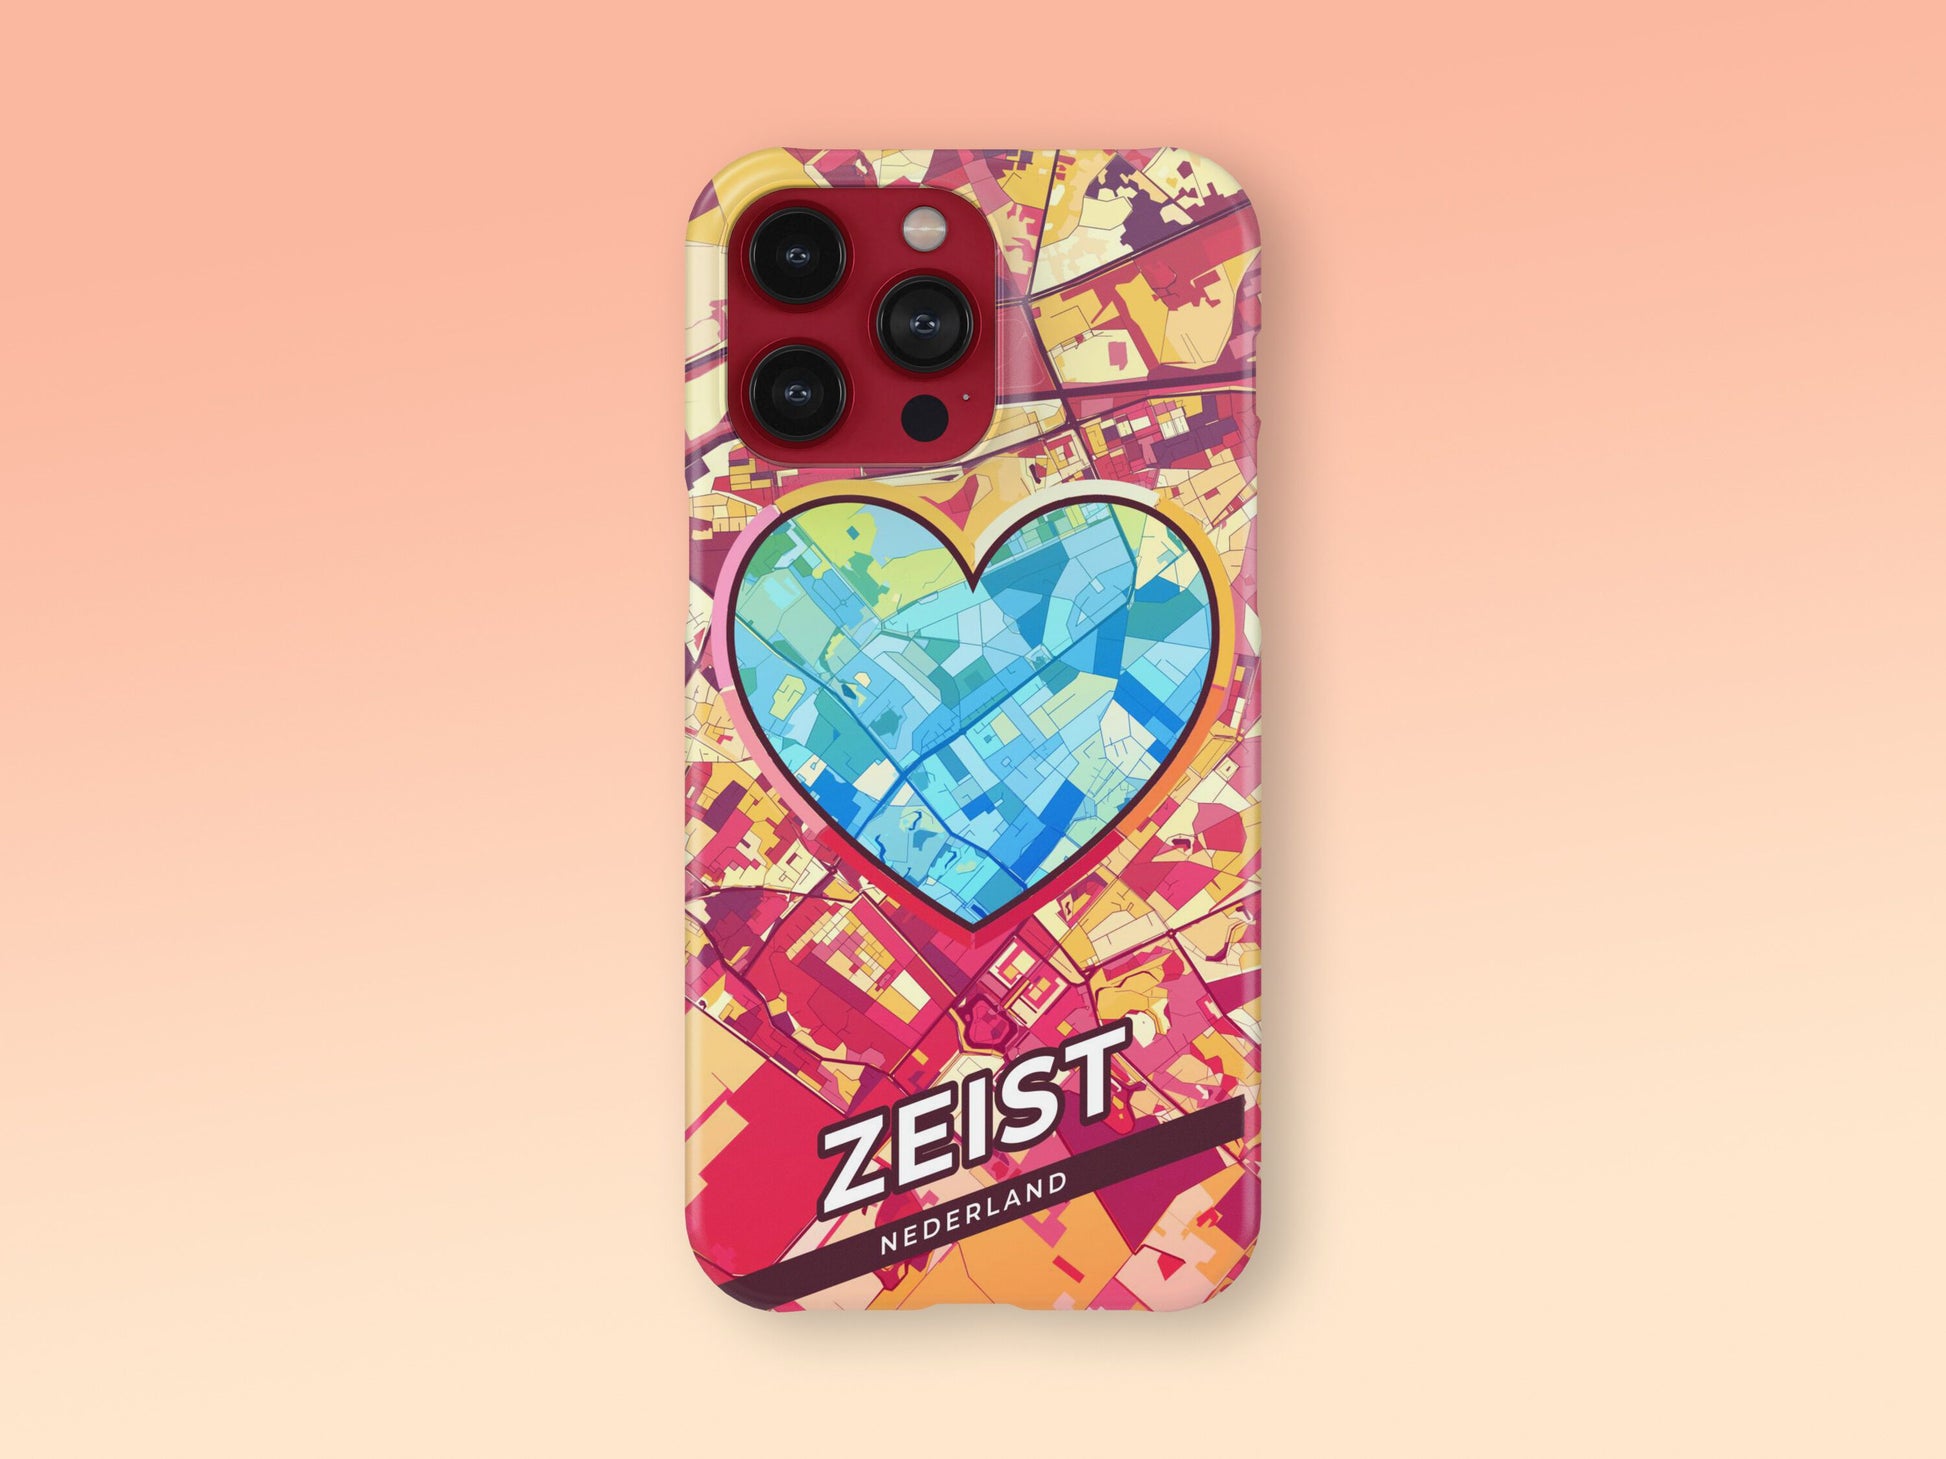 Zeist Netherlands slim phone case with colorful icon 2